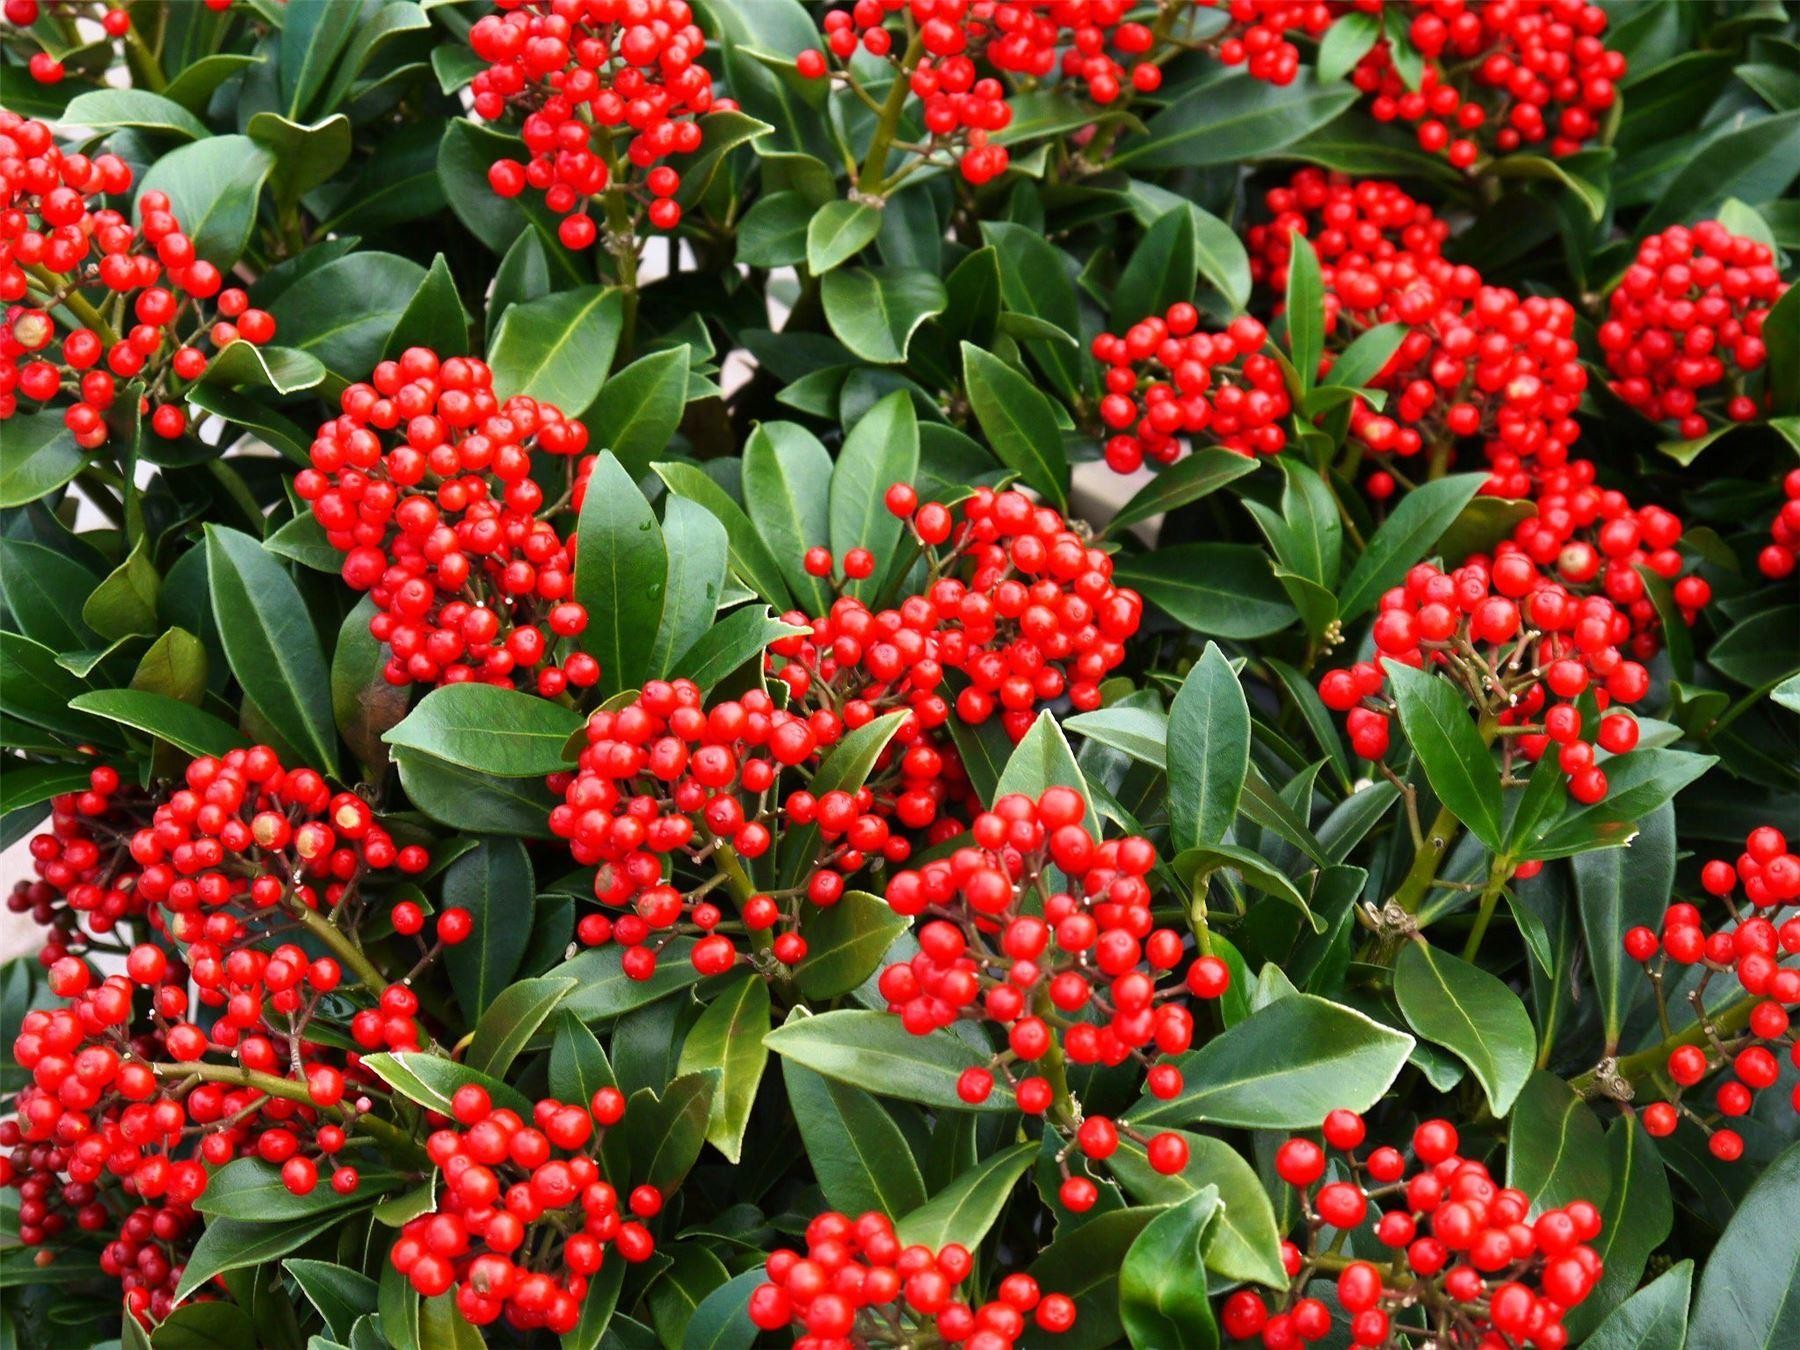 skimmia japonica plant autumn garden shrubs specimen plants colour berries perrywood beautiful flower special deal nursery red essex small